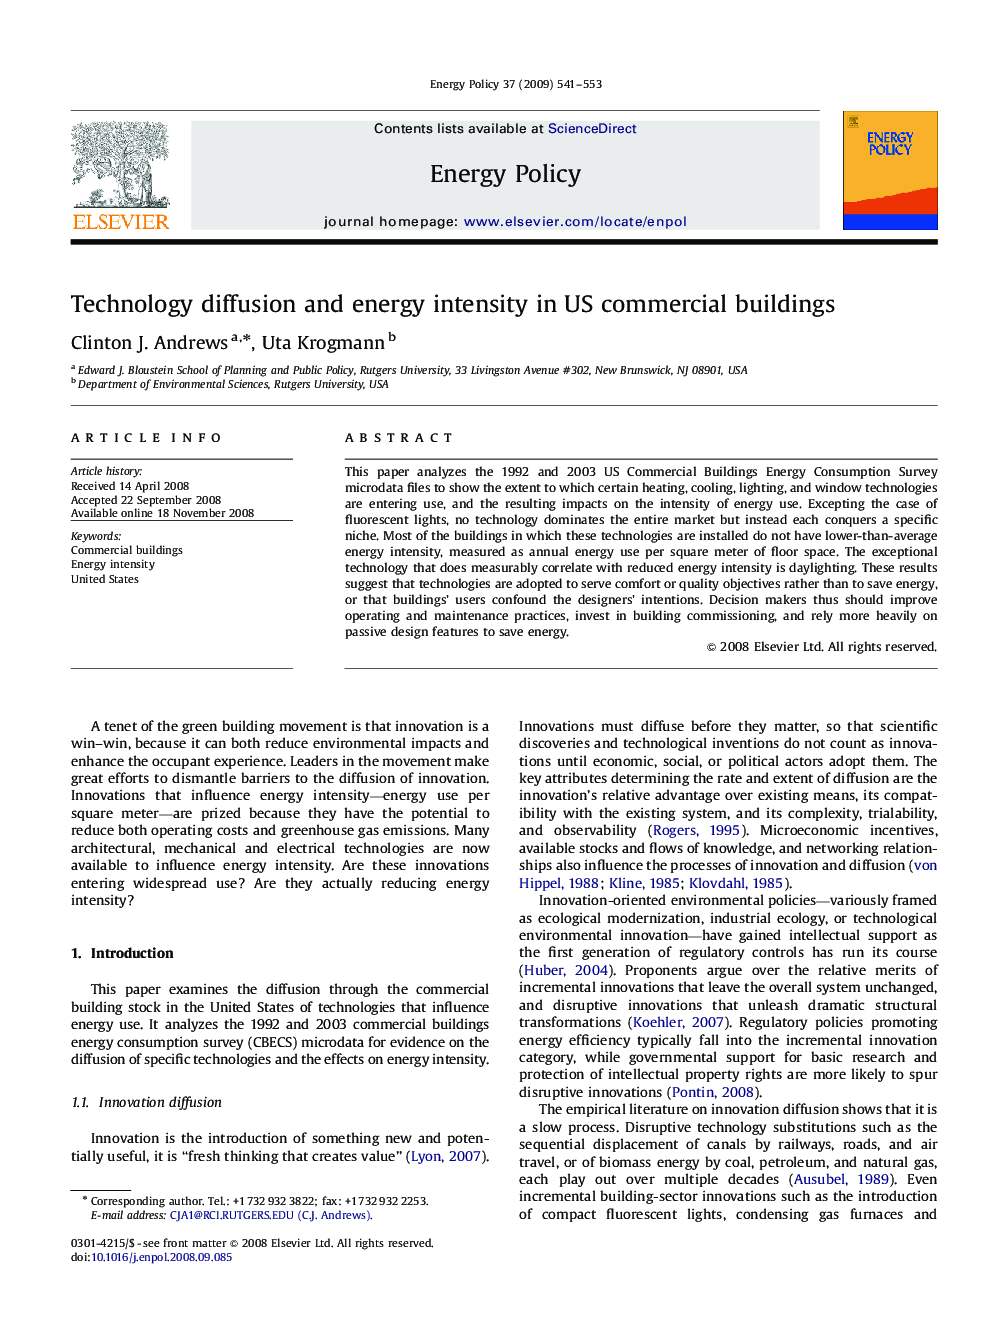 Technology diffusion and energy intensity in US commercial buildings